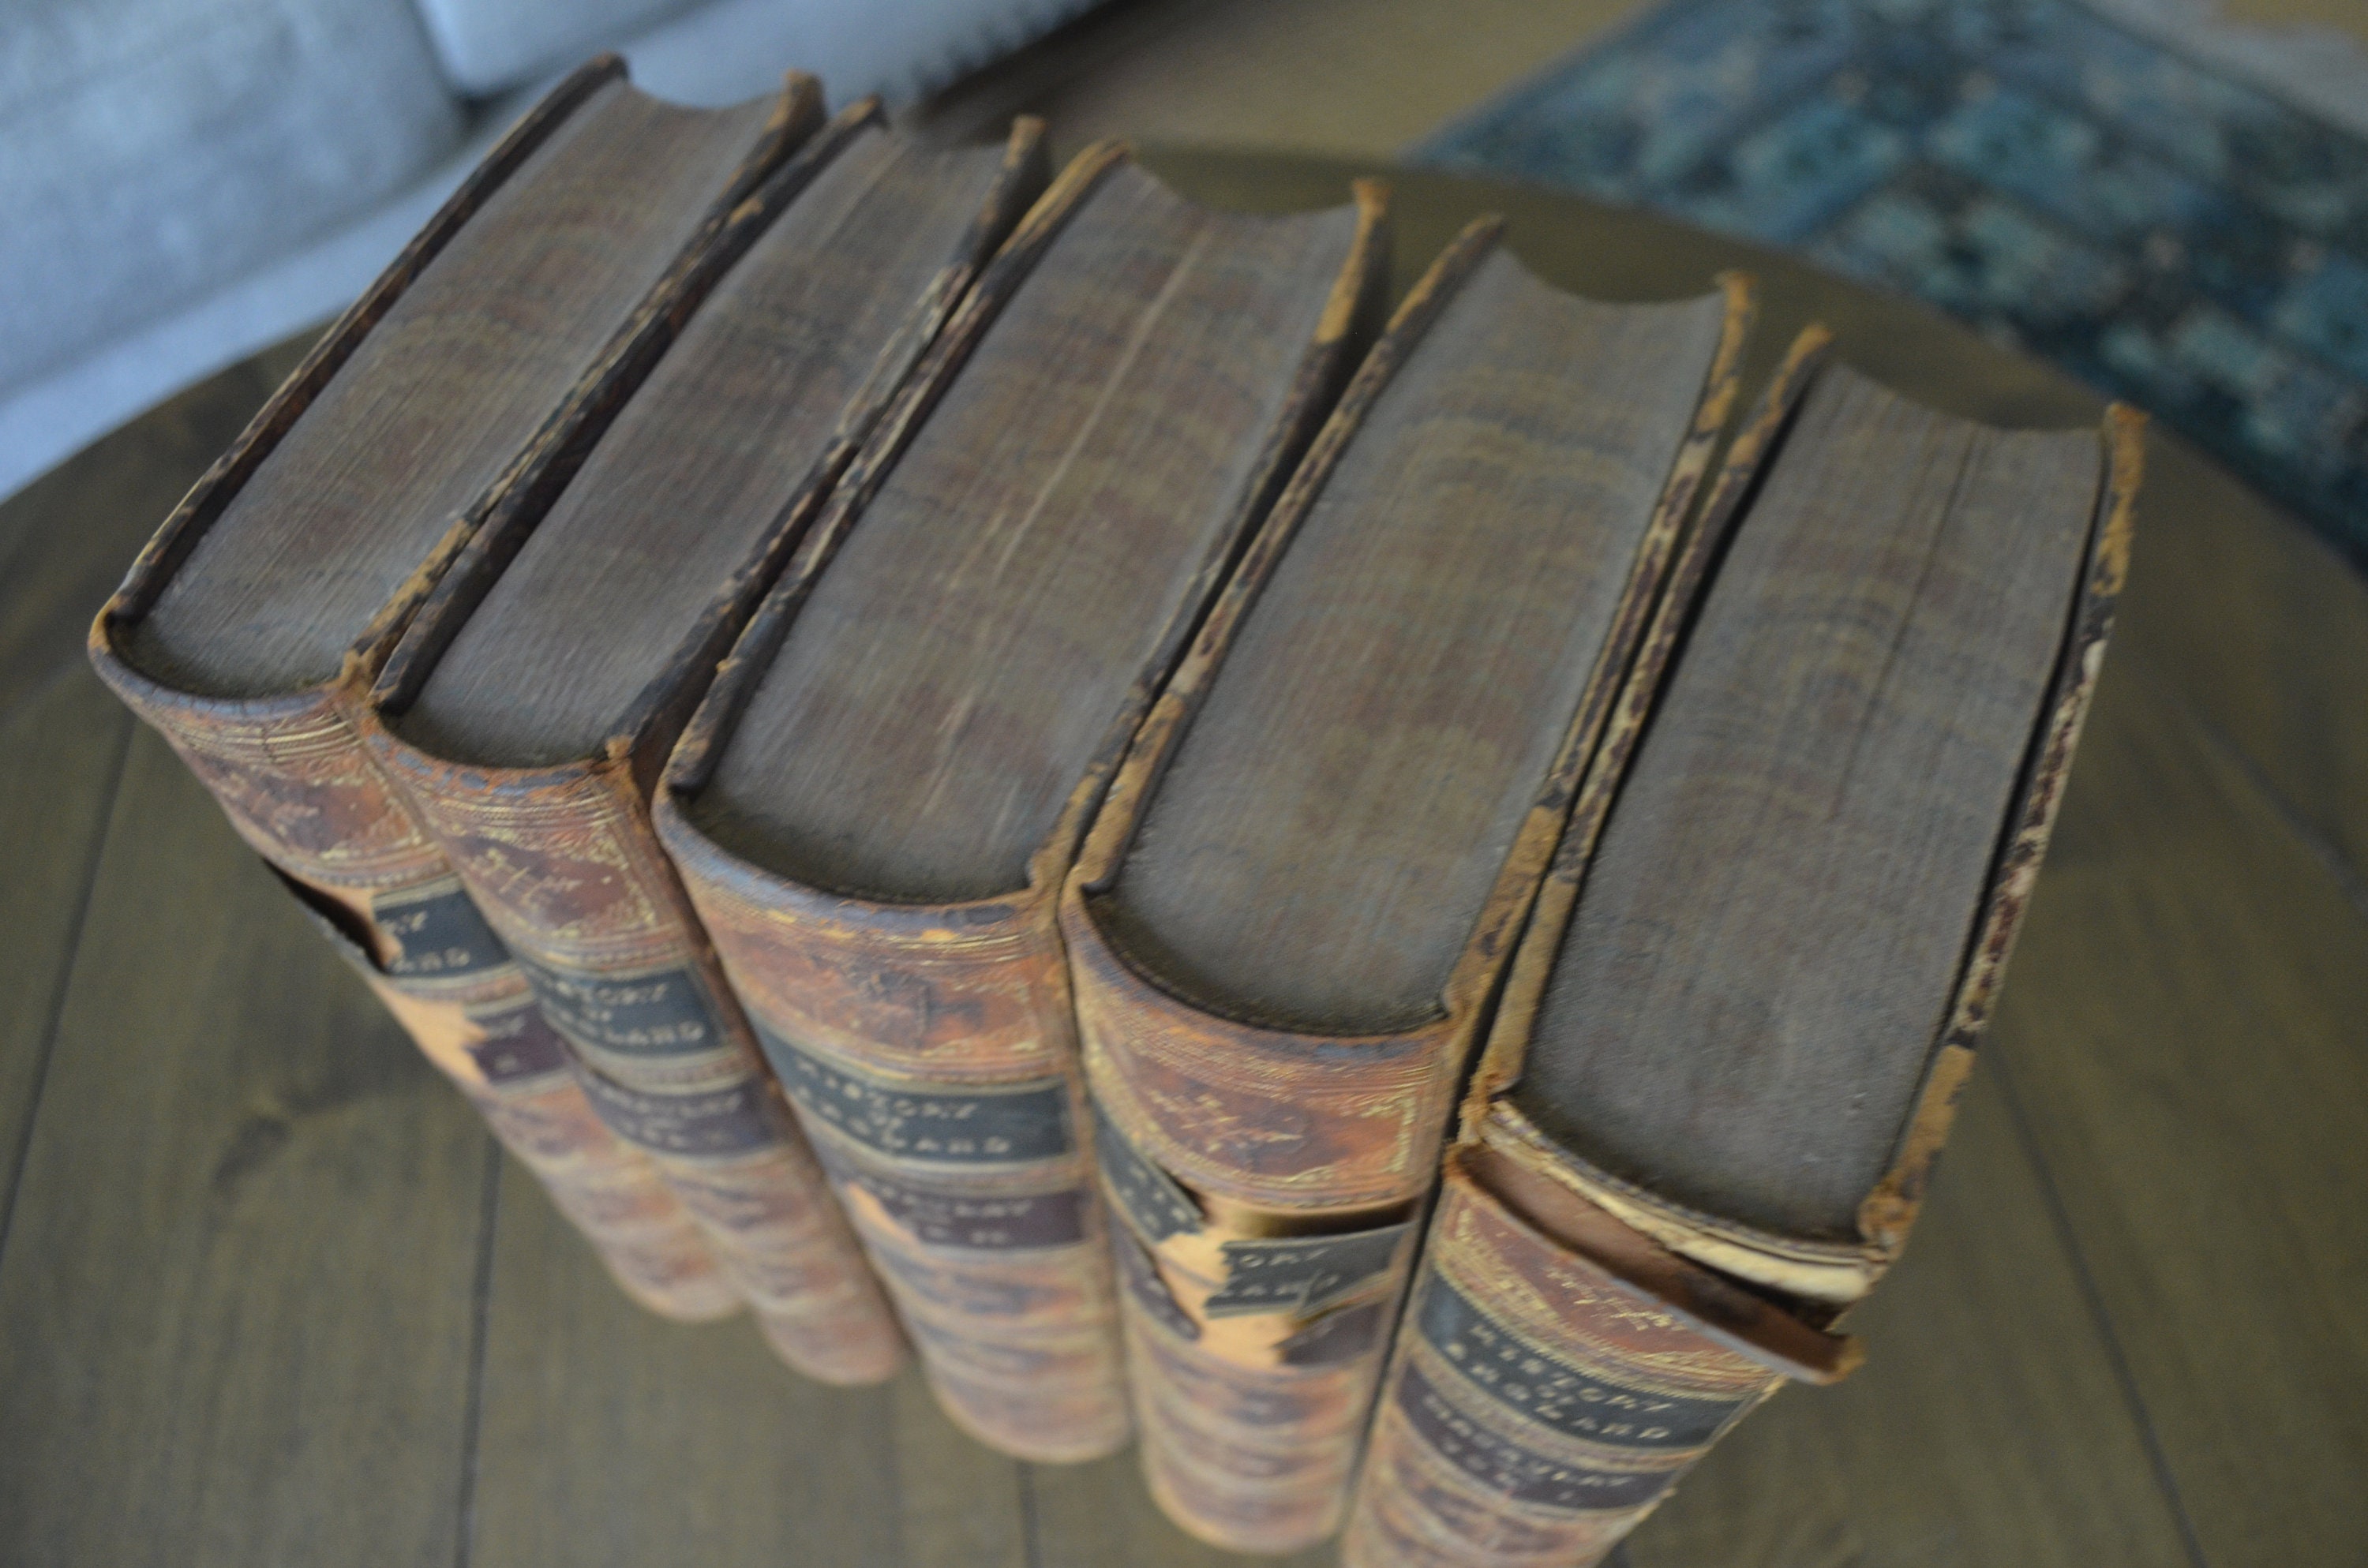 Antique Books, History Guizont, England, 5 Volumes, 1876, 19th Century (  1800s ), NIce Collection!!